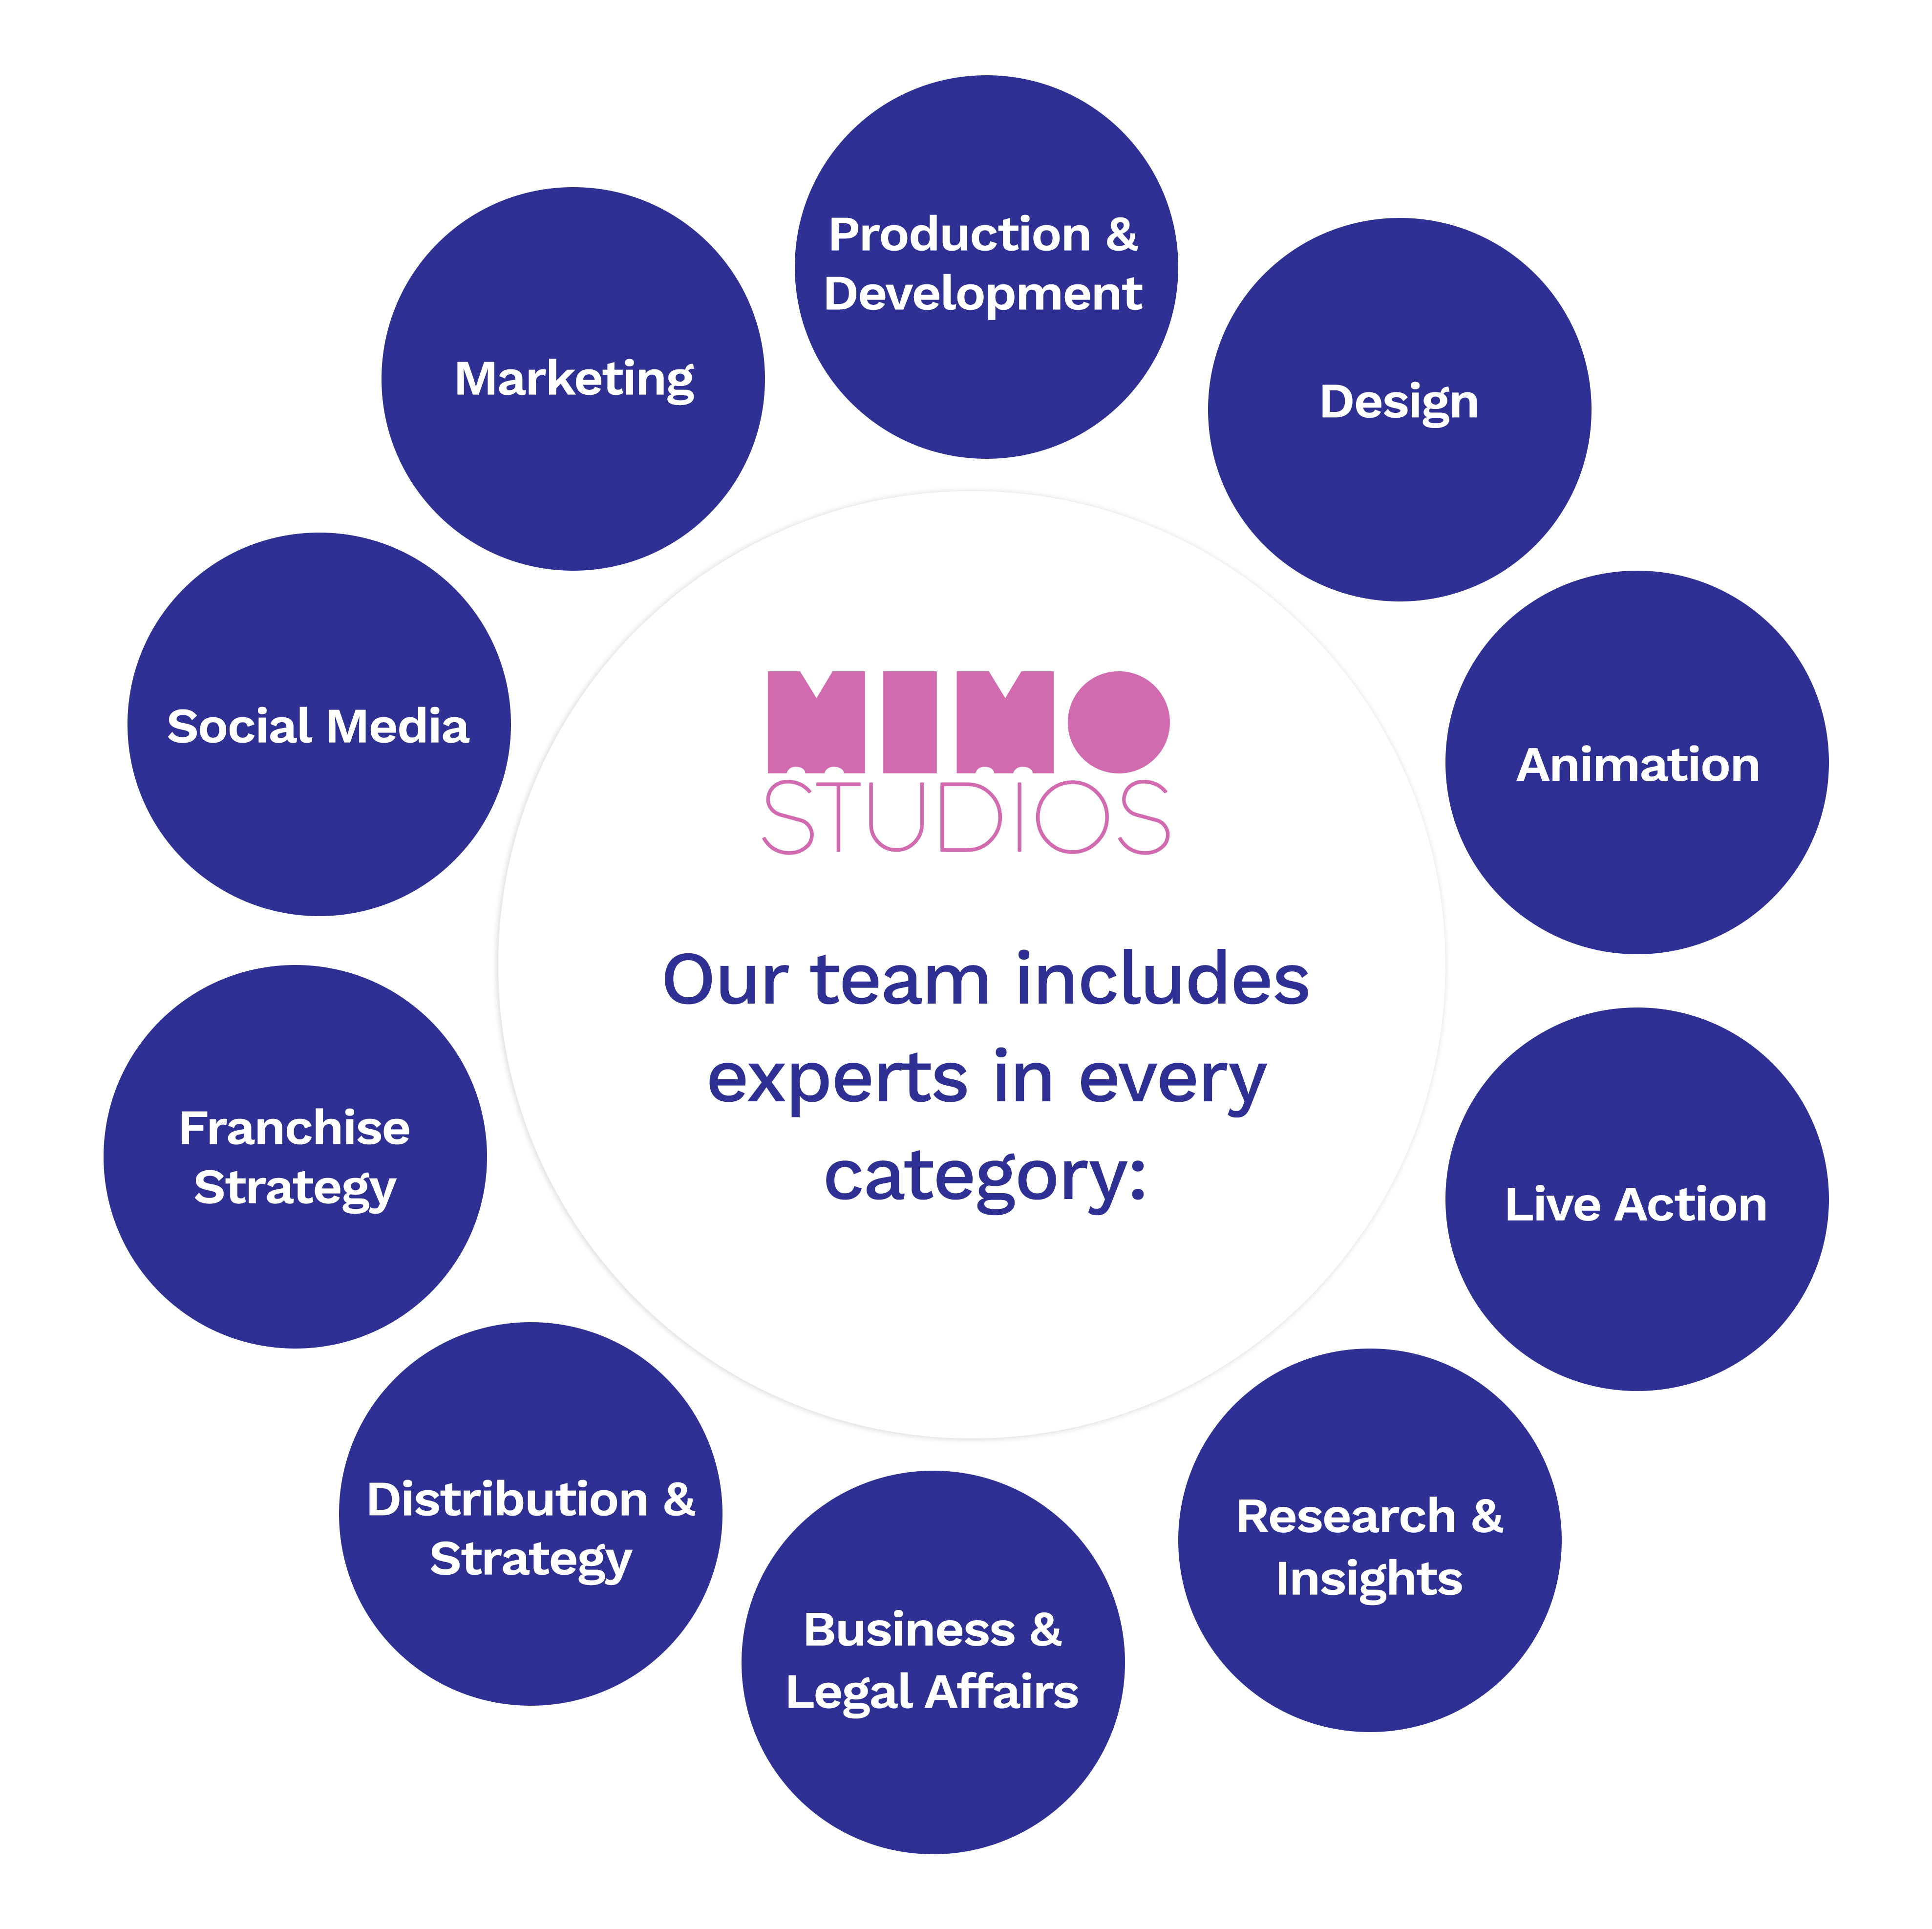 MIMO Studios Work Ecosystem and Strategy